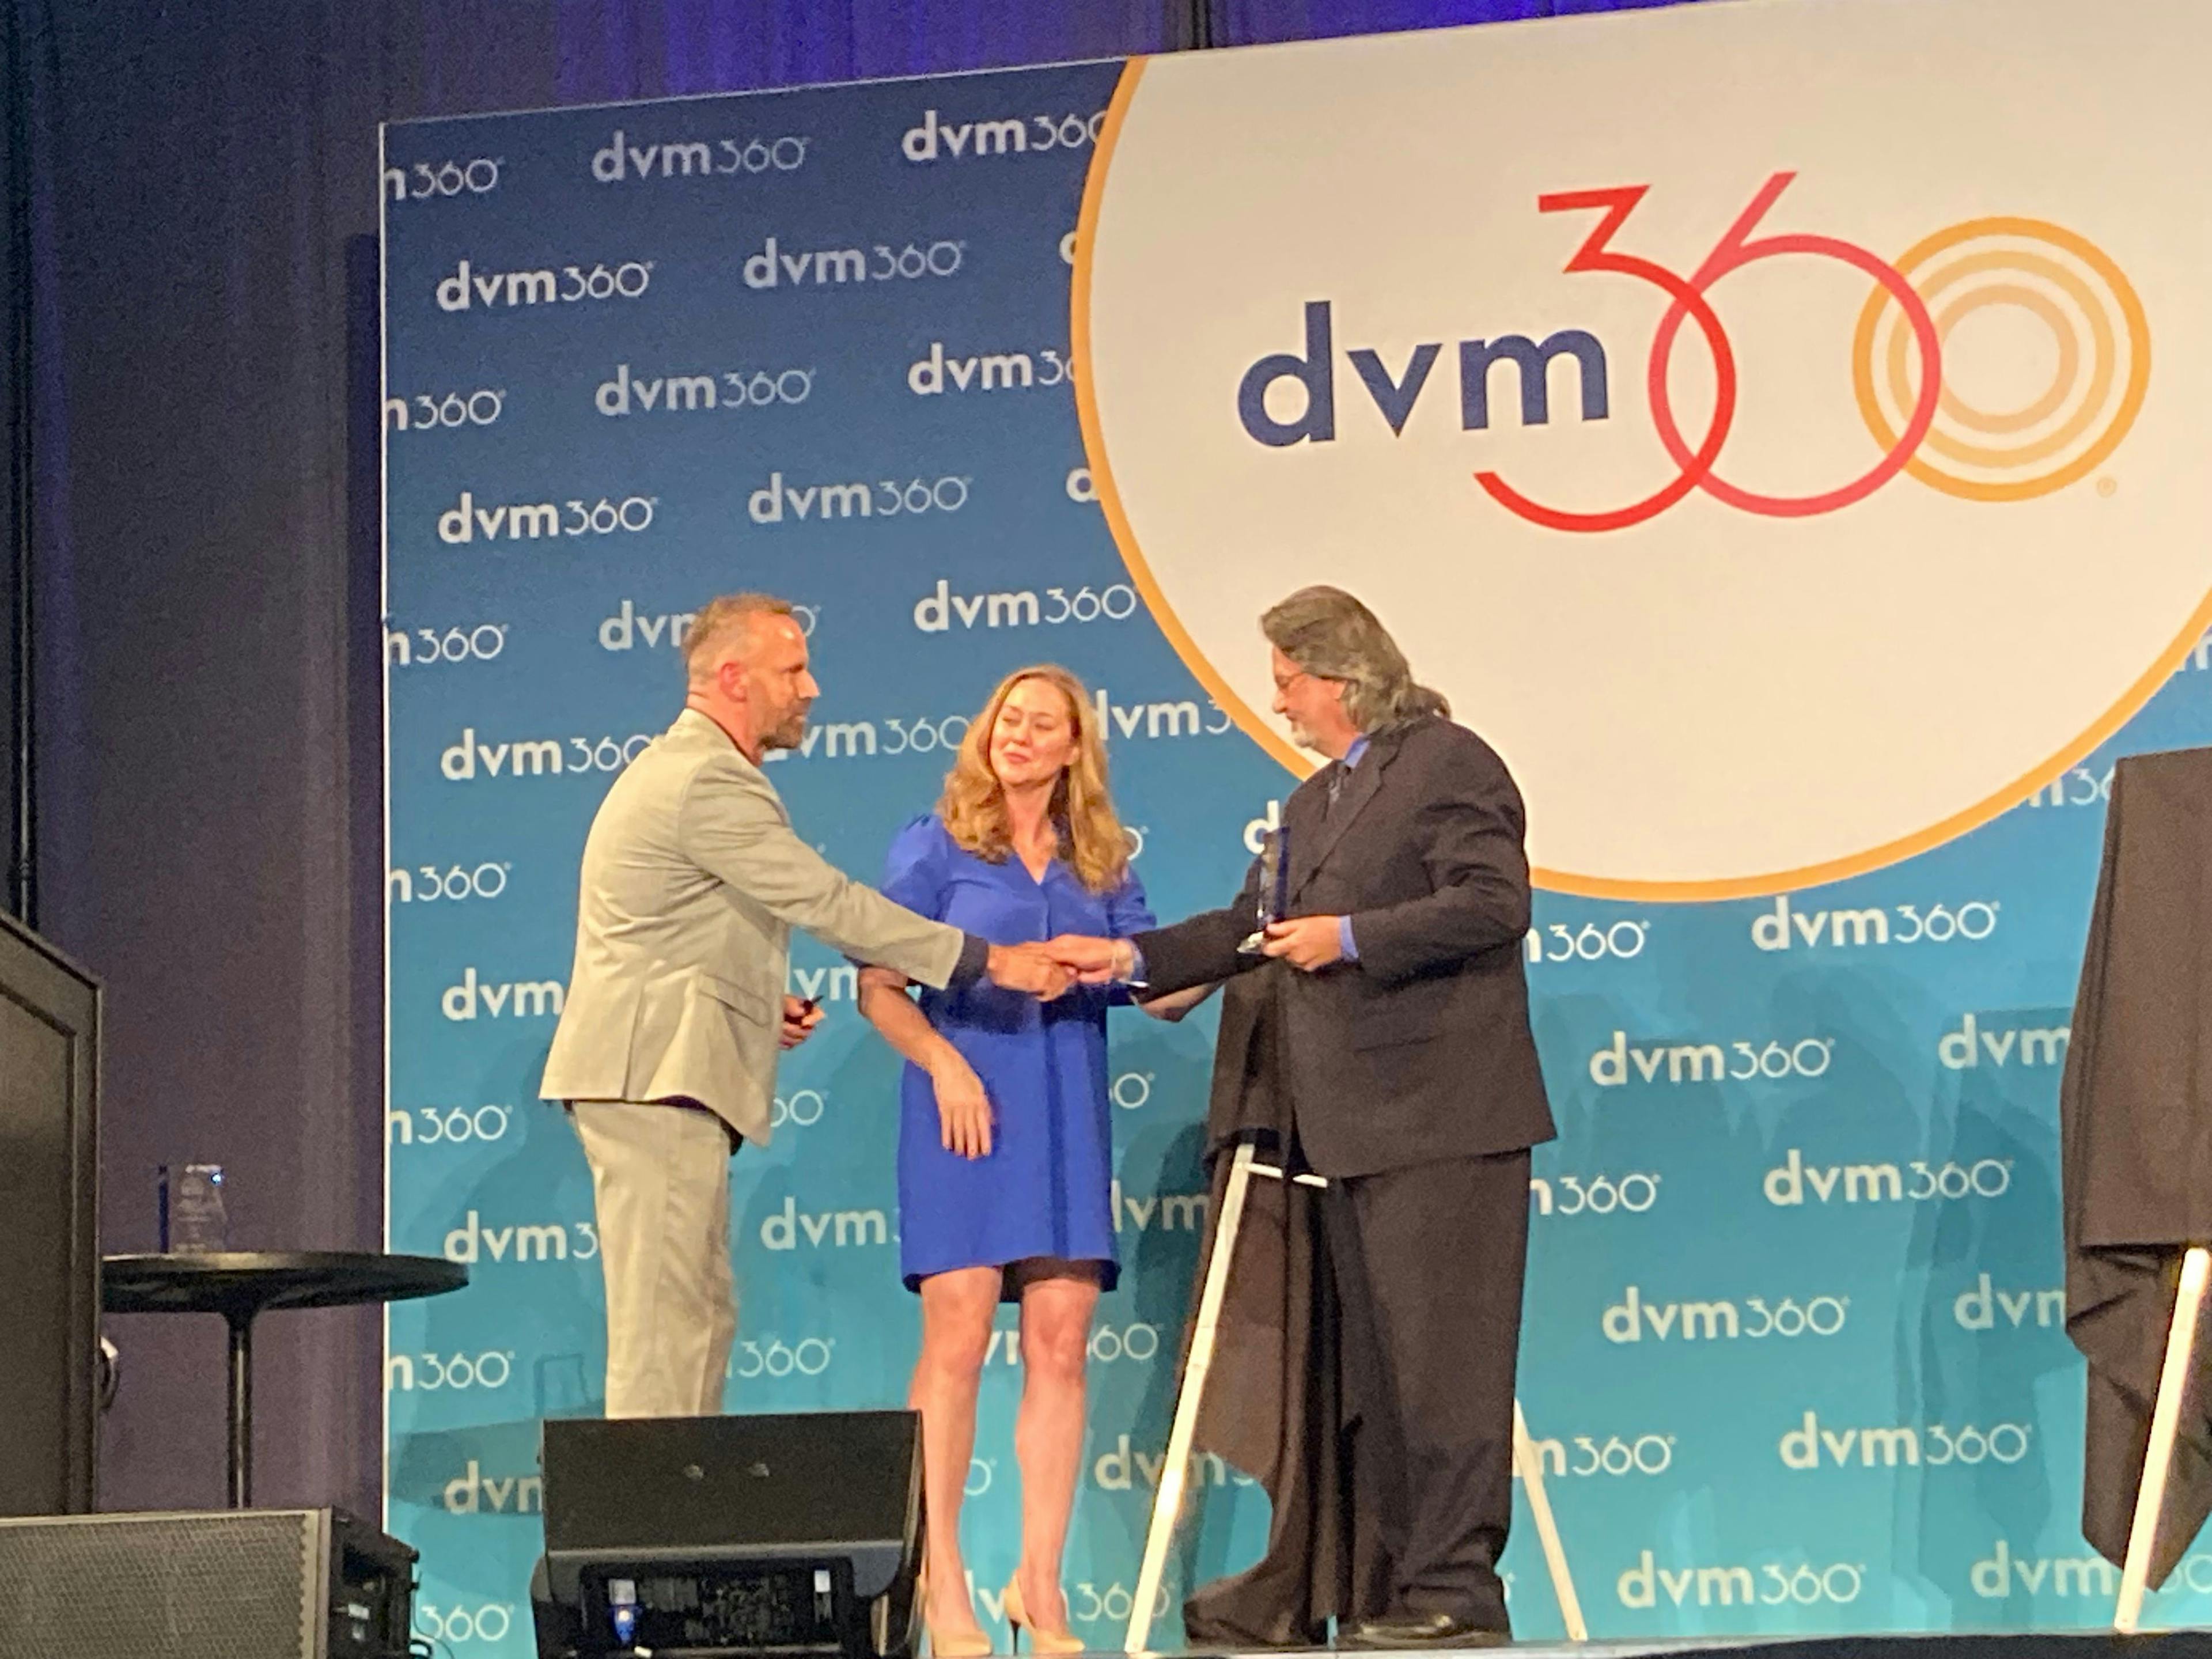 Photo: Kristen Coppock, MA

Adam Christman, DVM, MBA, chief veterinary officer for dvm360 (left), and Katy Nelson, DVM, associate director of veterinary relations for Chewy Health, present an Innovator of the Year Award to Phillip J. Bergman, DVM, PhD, DACVIM (Oncology), at the 2023 Fetch dvm360 conference in Long Beach, California.